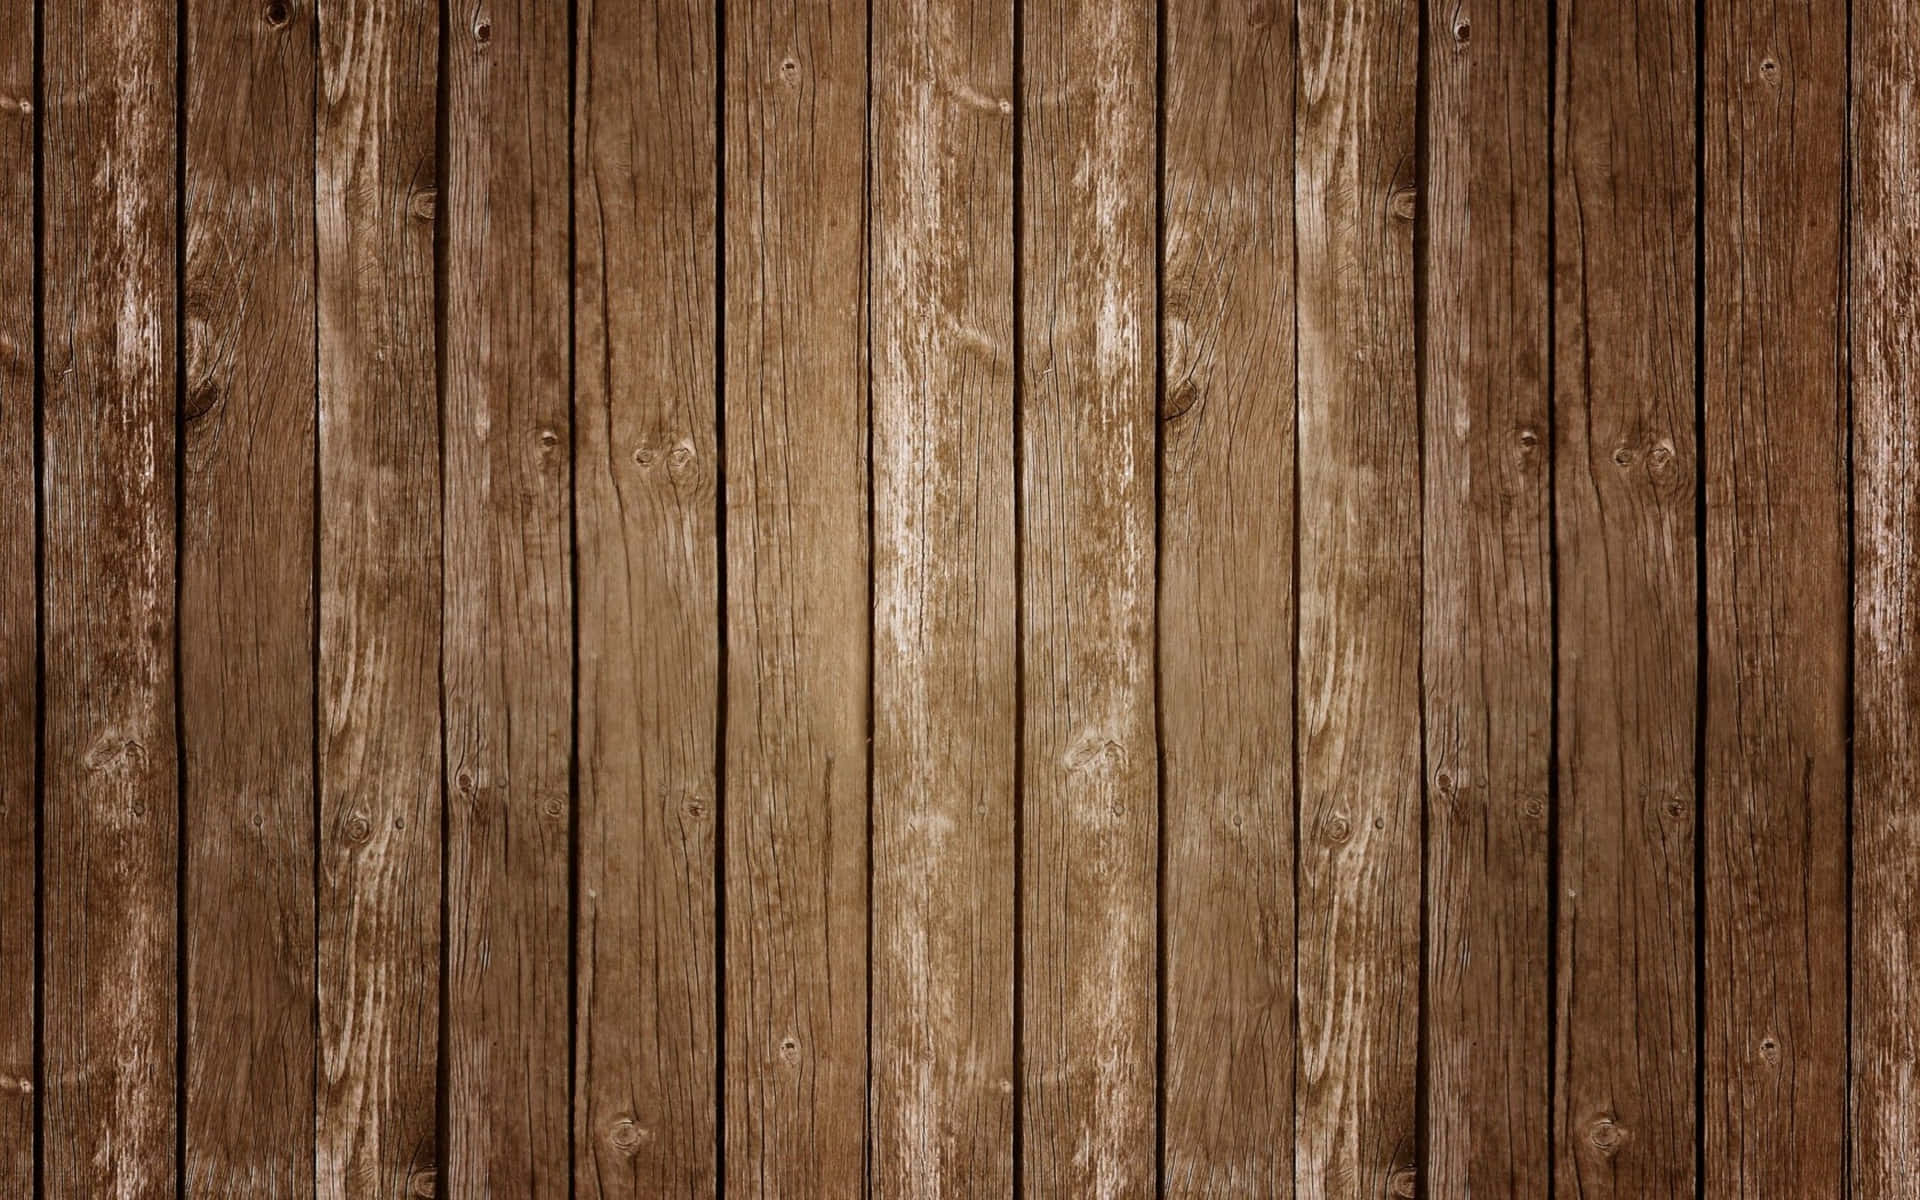 Image  Close-up of light brown wood grain pattern